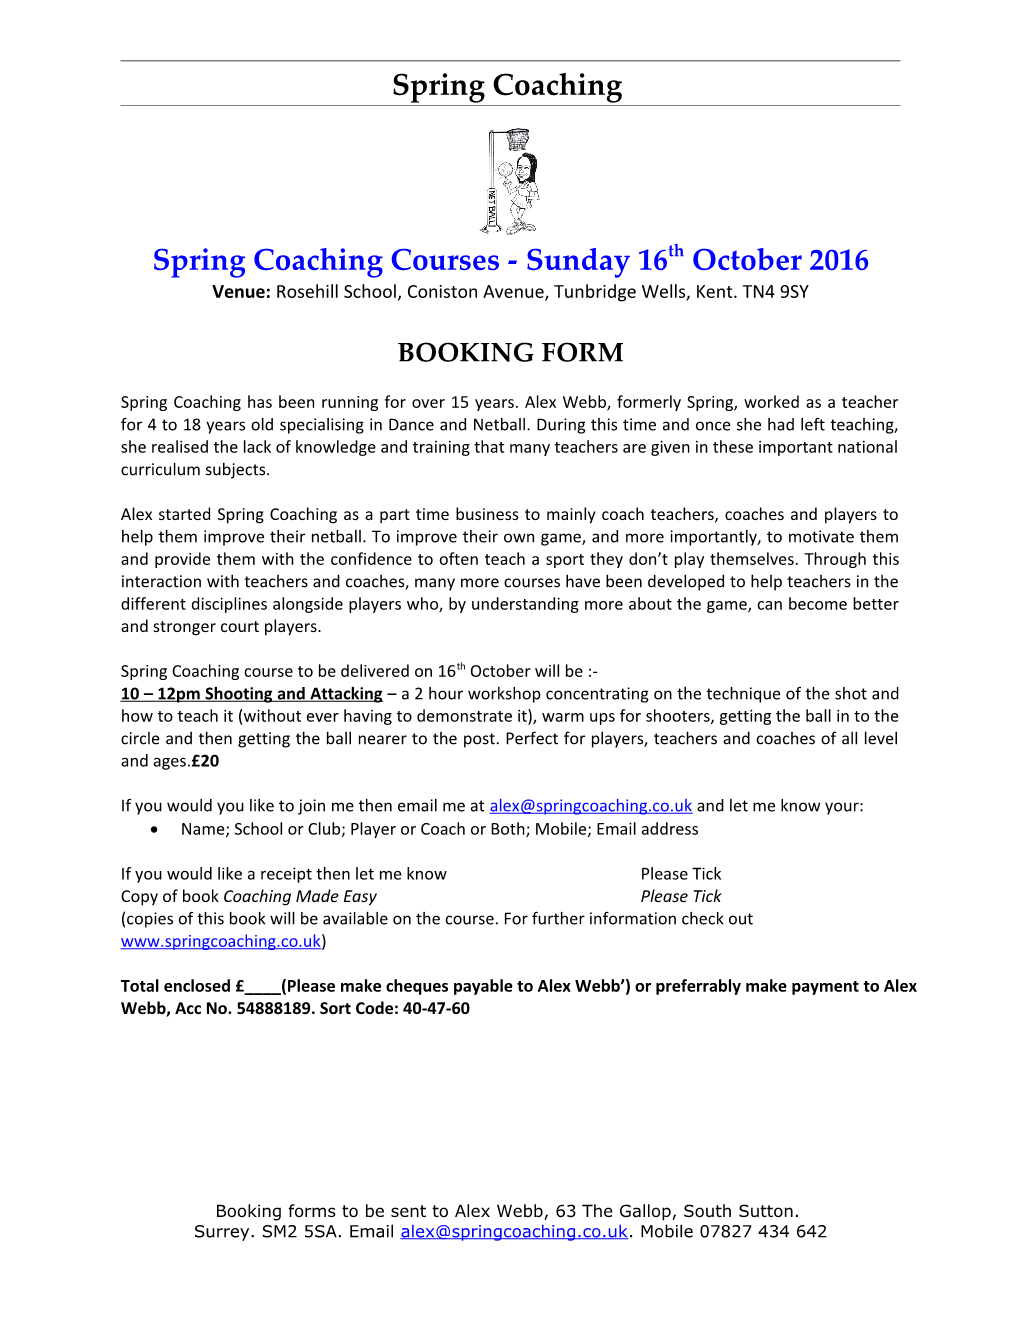 Spring Coaching Courses - Sunday 16Th October 2016